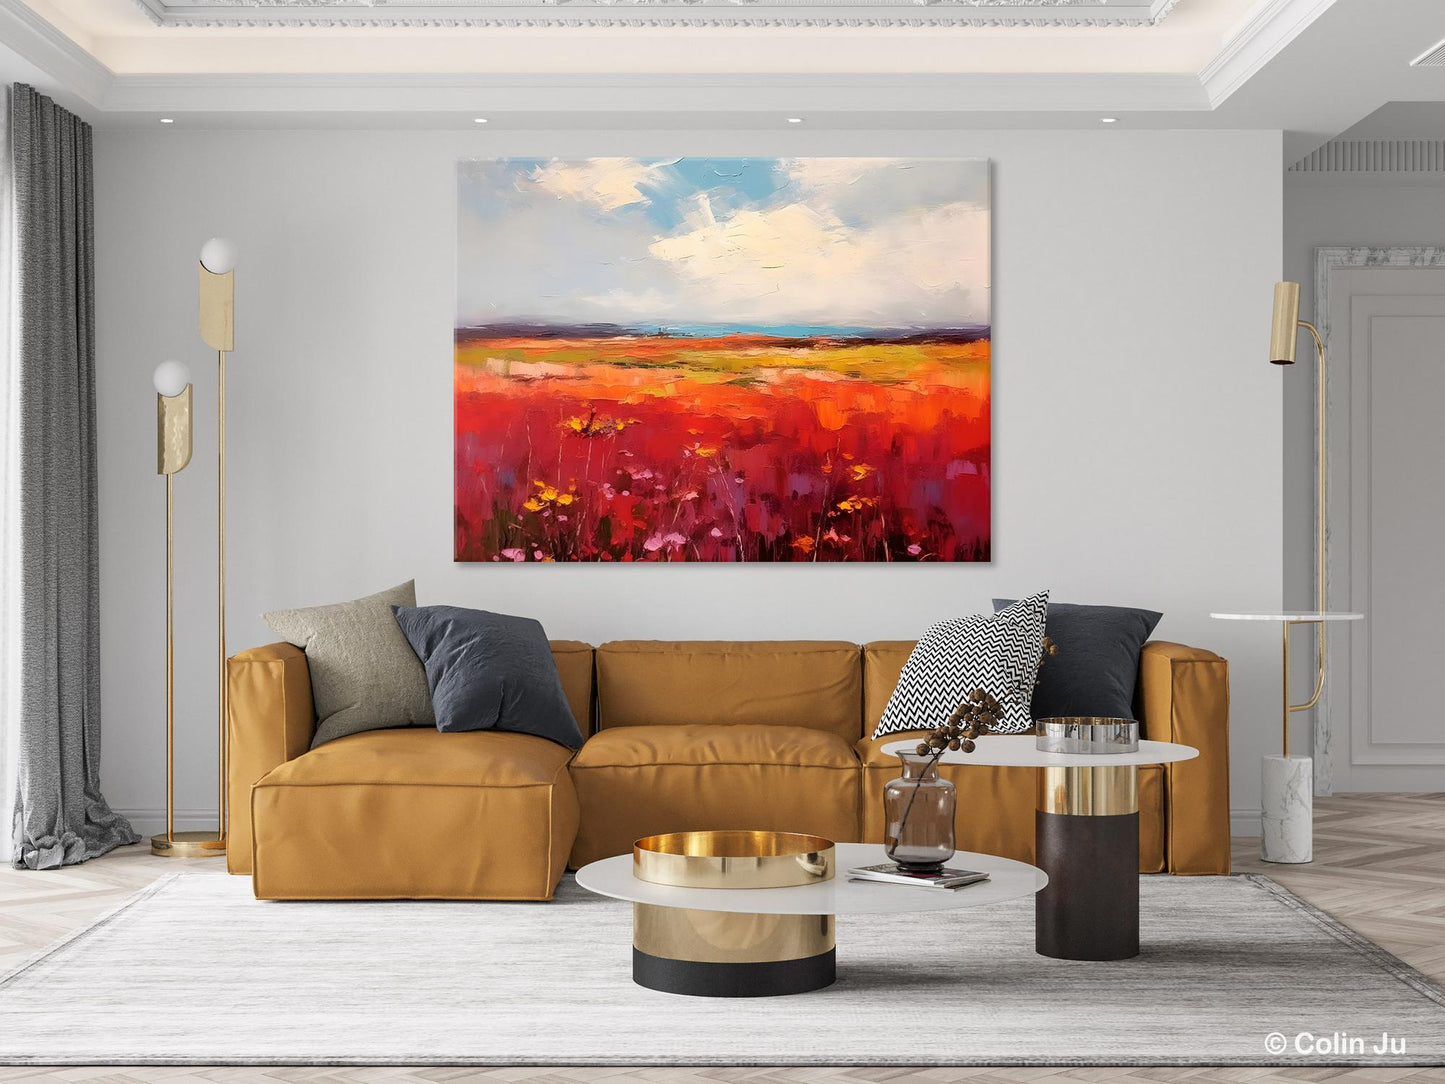 Extra Large Wall Art Painting, Landscape Canvas Painting for Living Room, Flower Field Acrylic Paintings, Original Landscape Acrylic Artwork